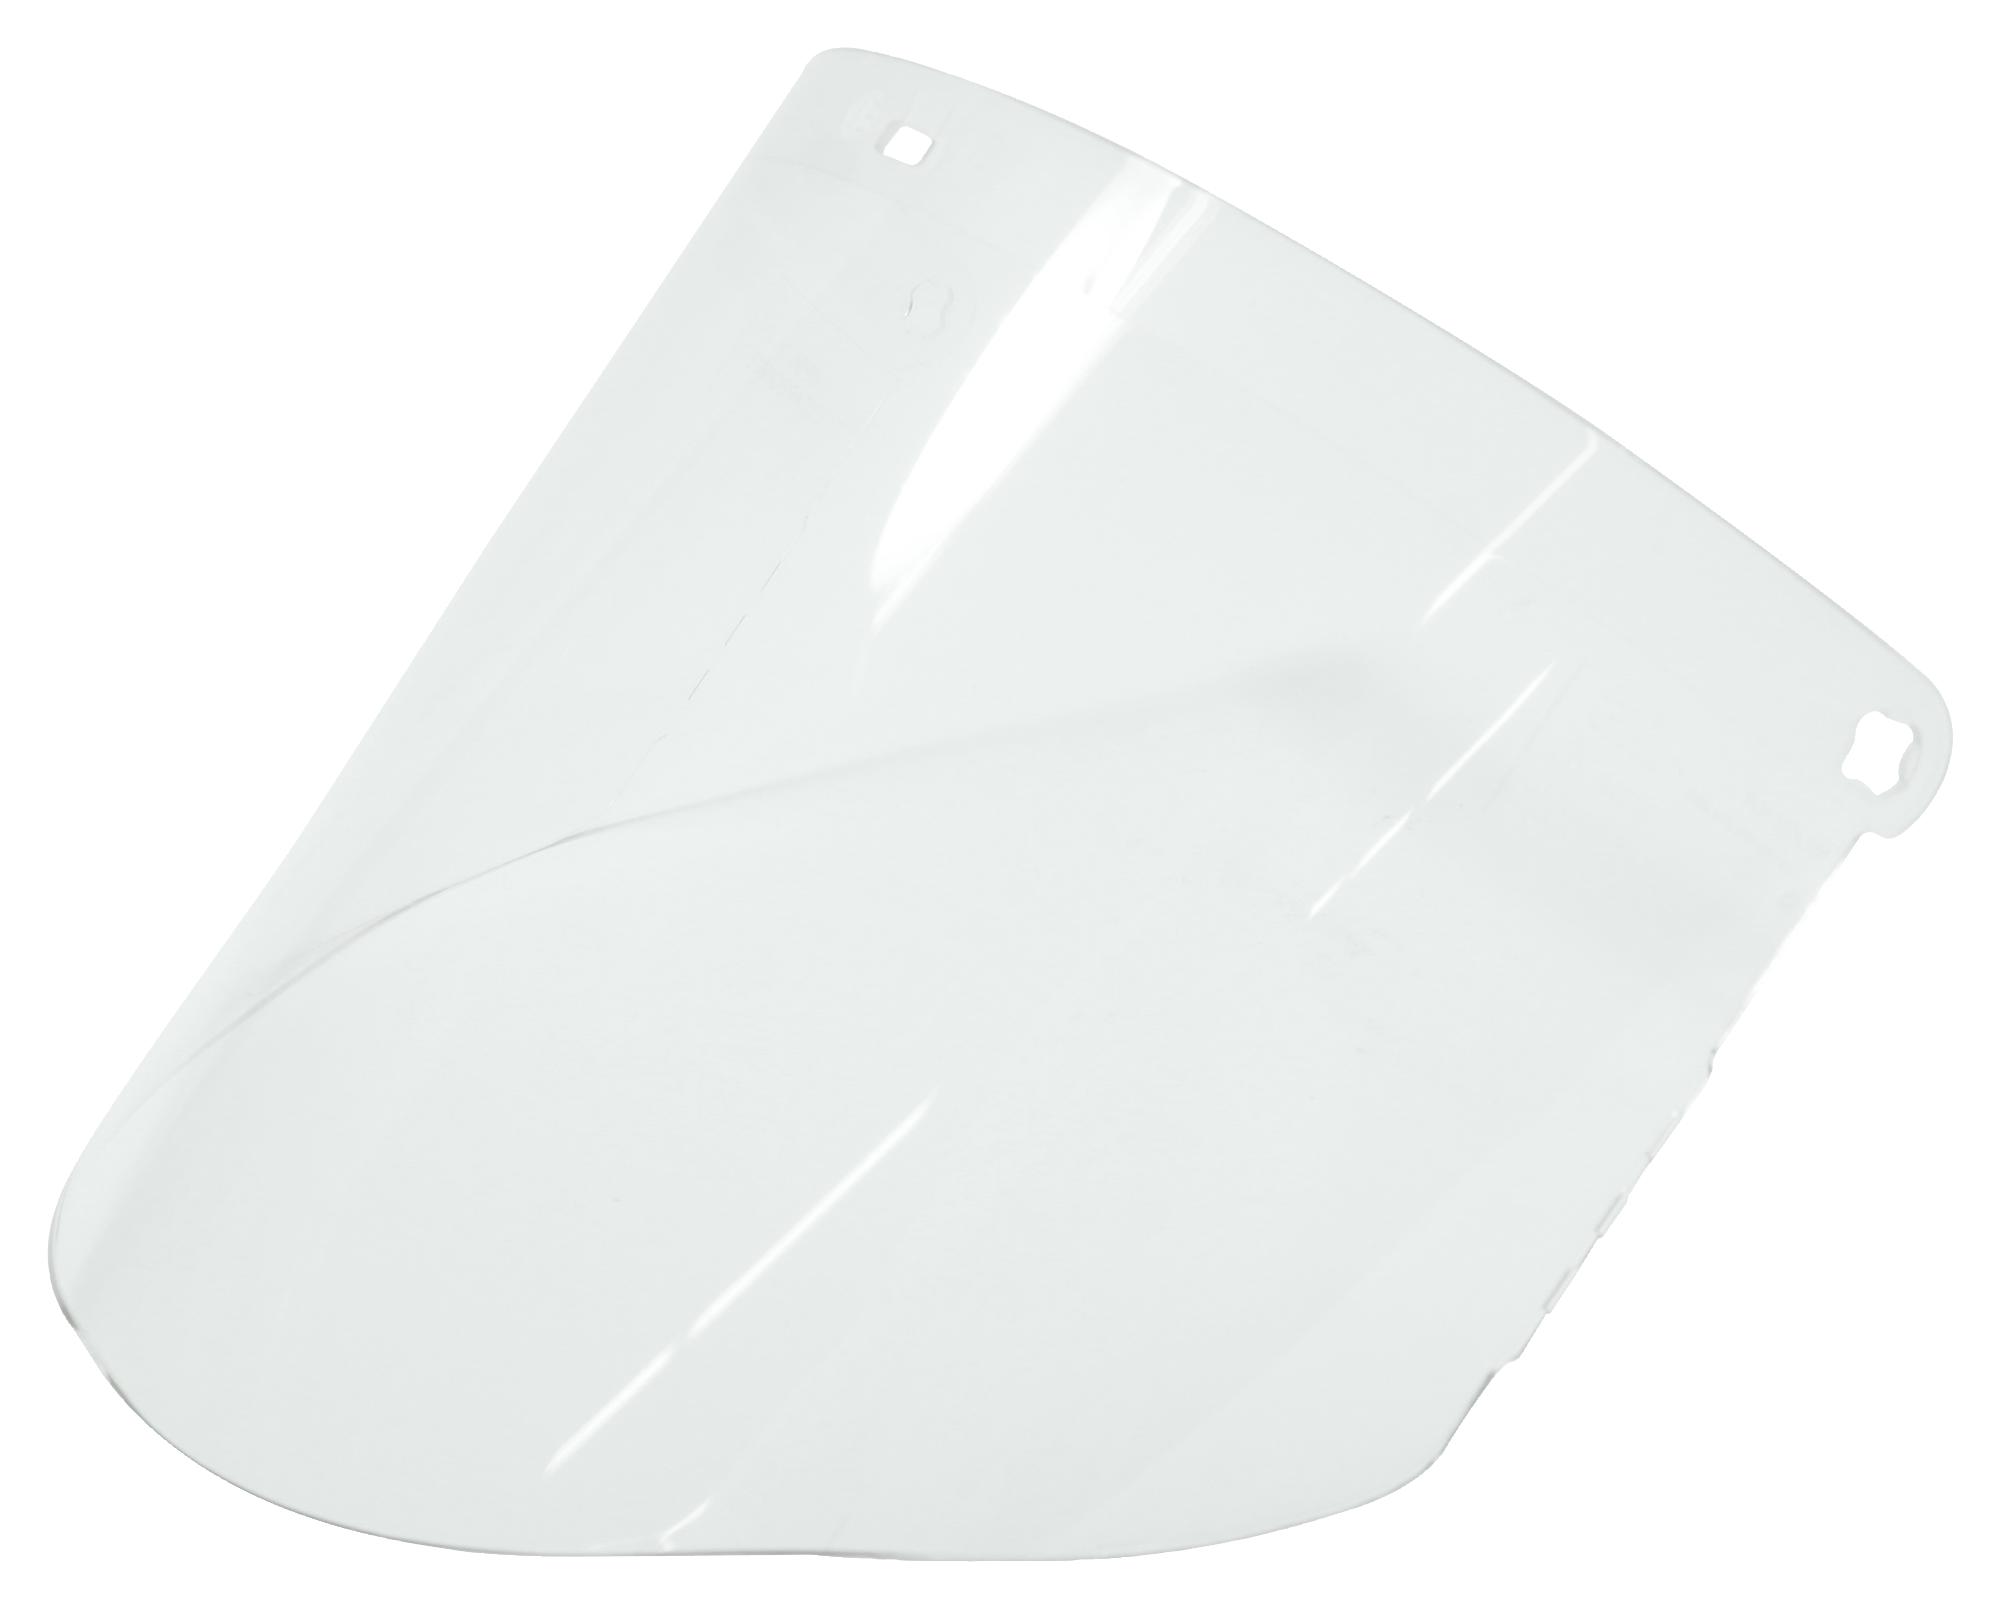 3M WP96 CLEAR POLYCARBONATE FACESHIELD